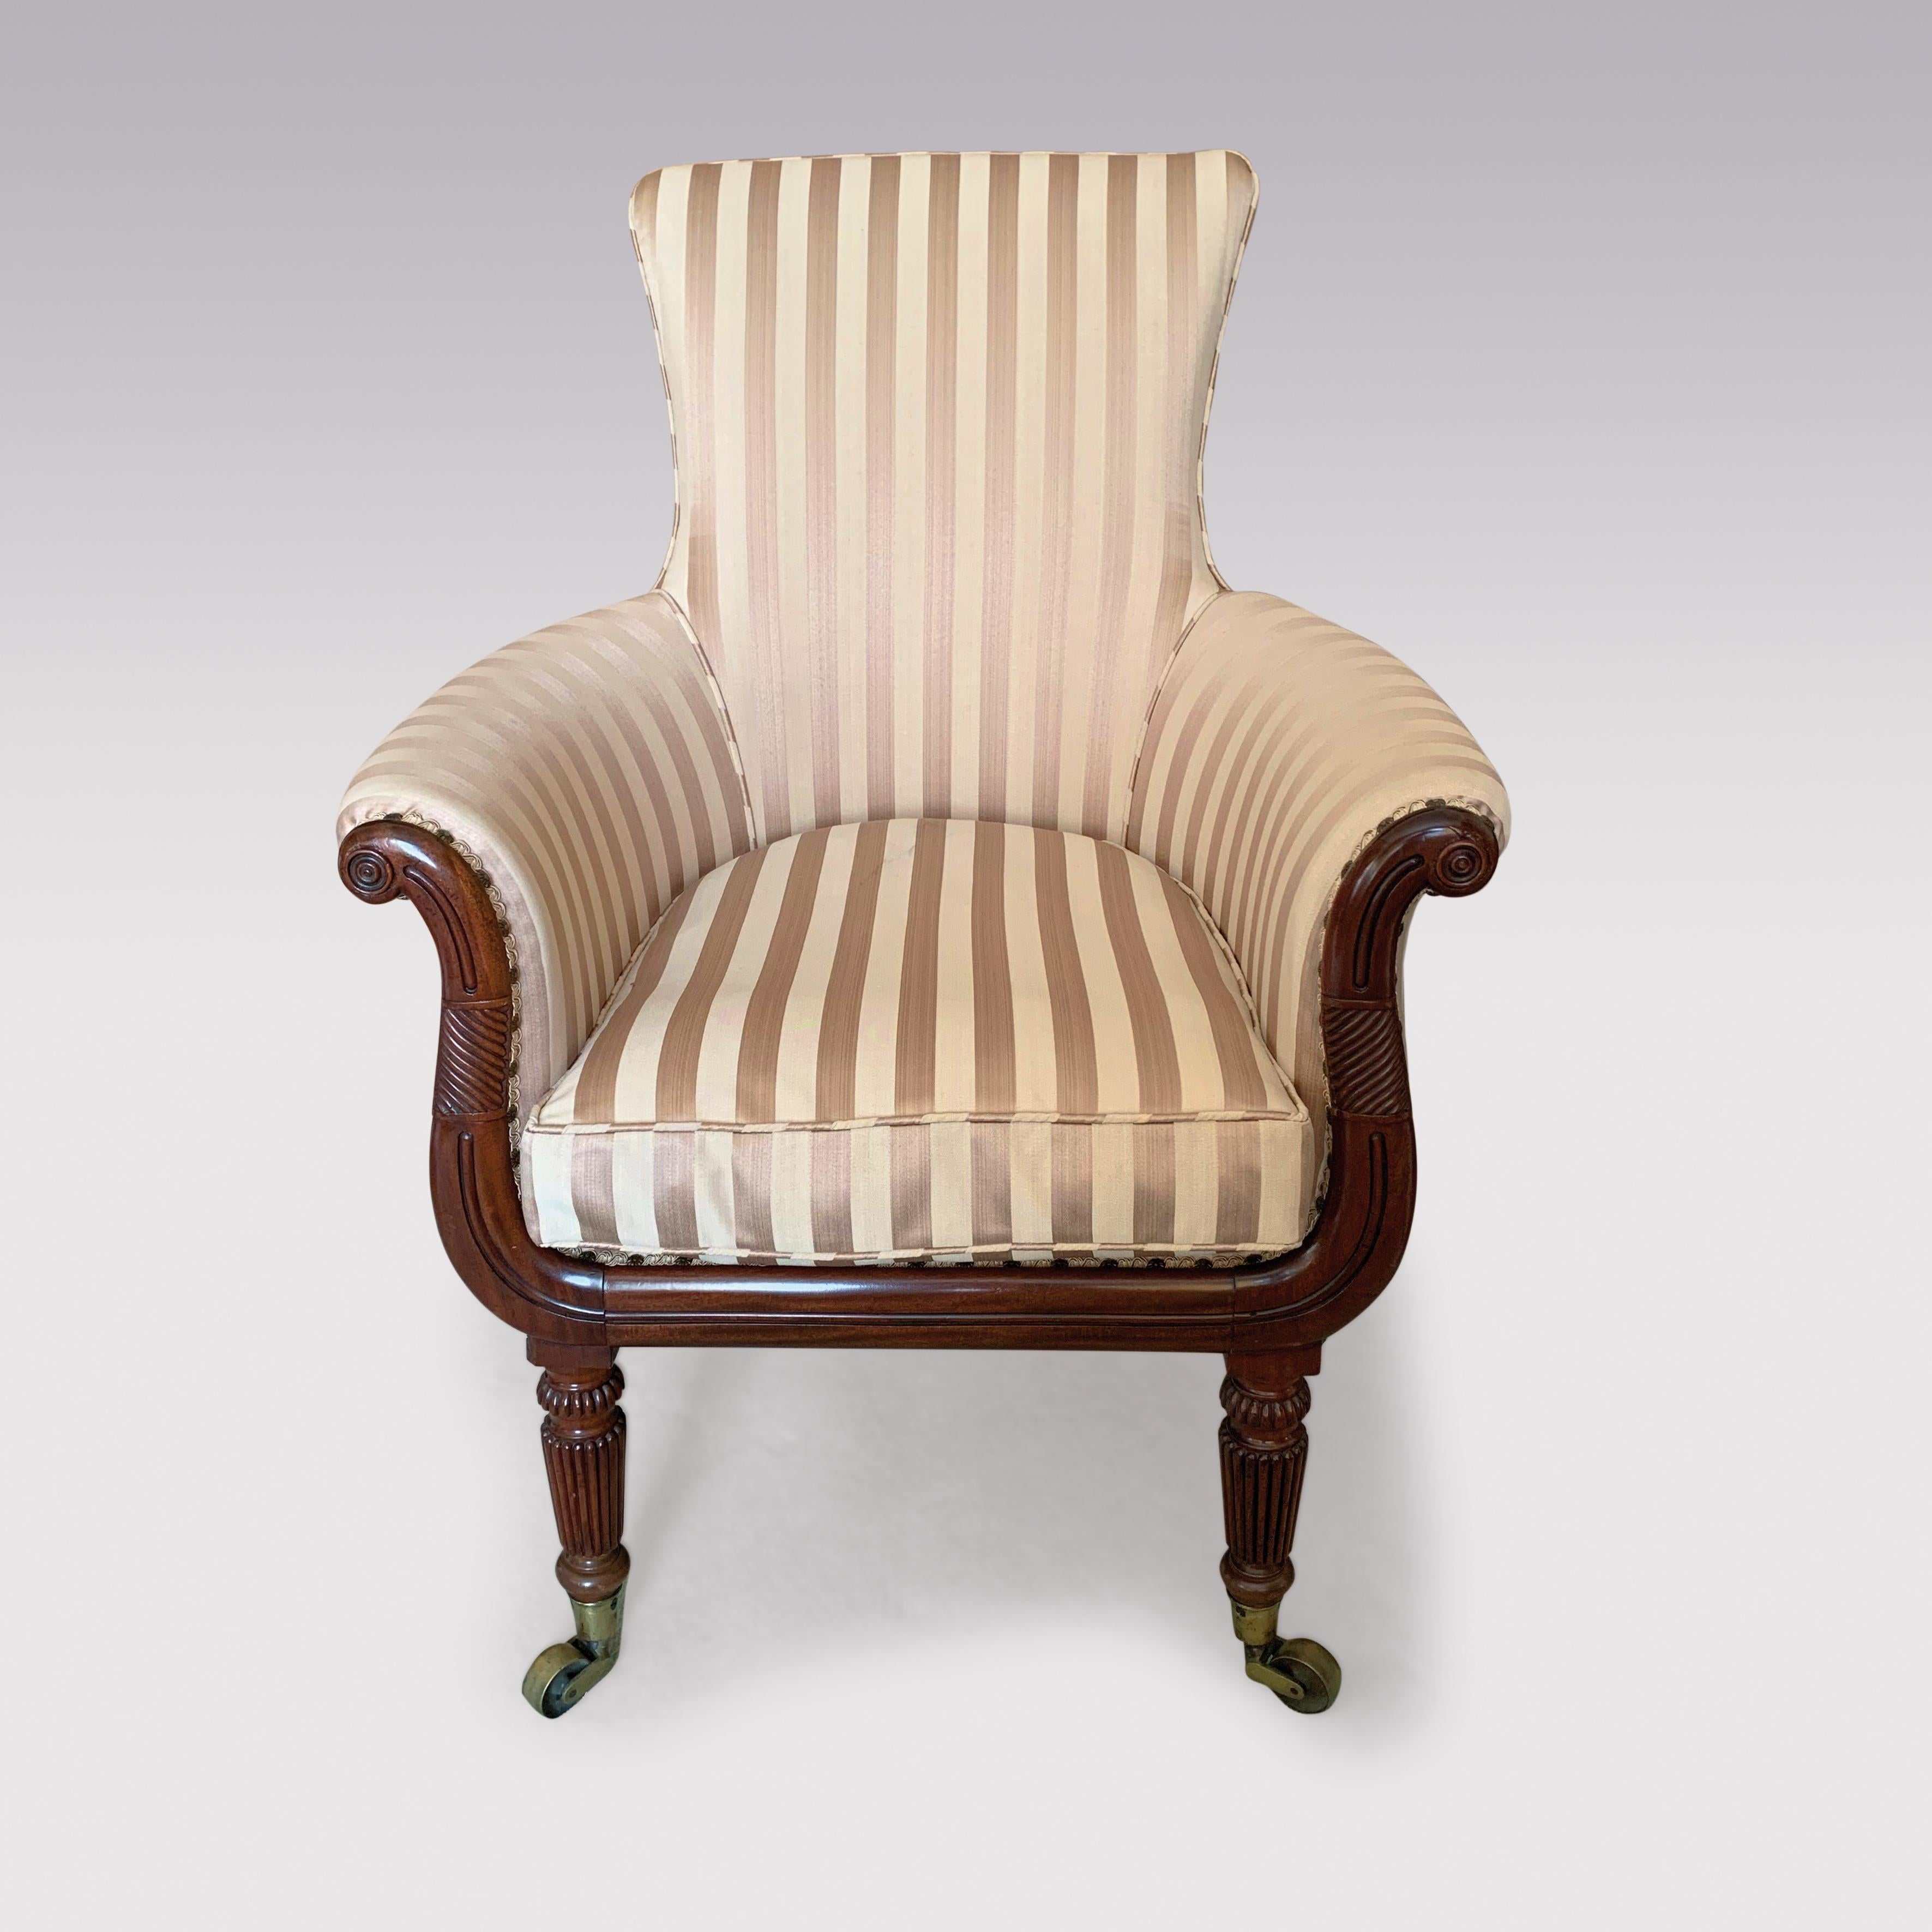 An early 19th century Regency period Tub chair in the style of Gillows of Lancaster, having spoon back with carved lyre-shaped arms, supported on turned reeded legs ending on brass castors.